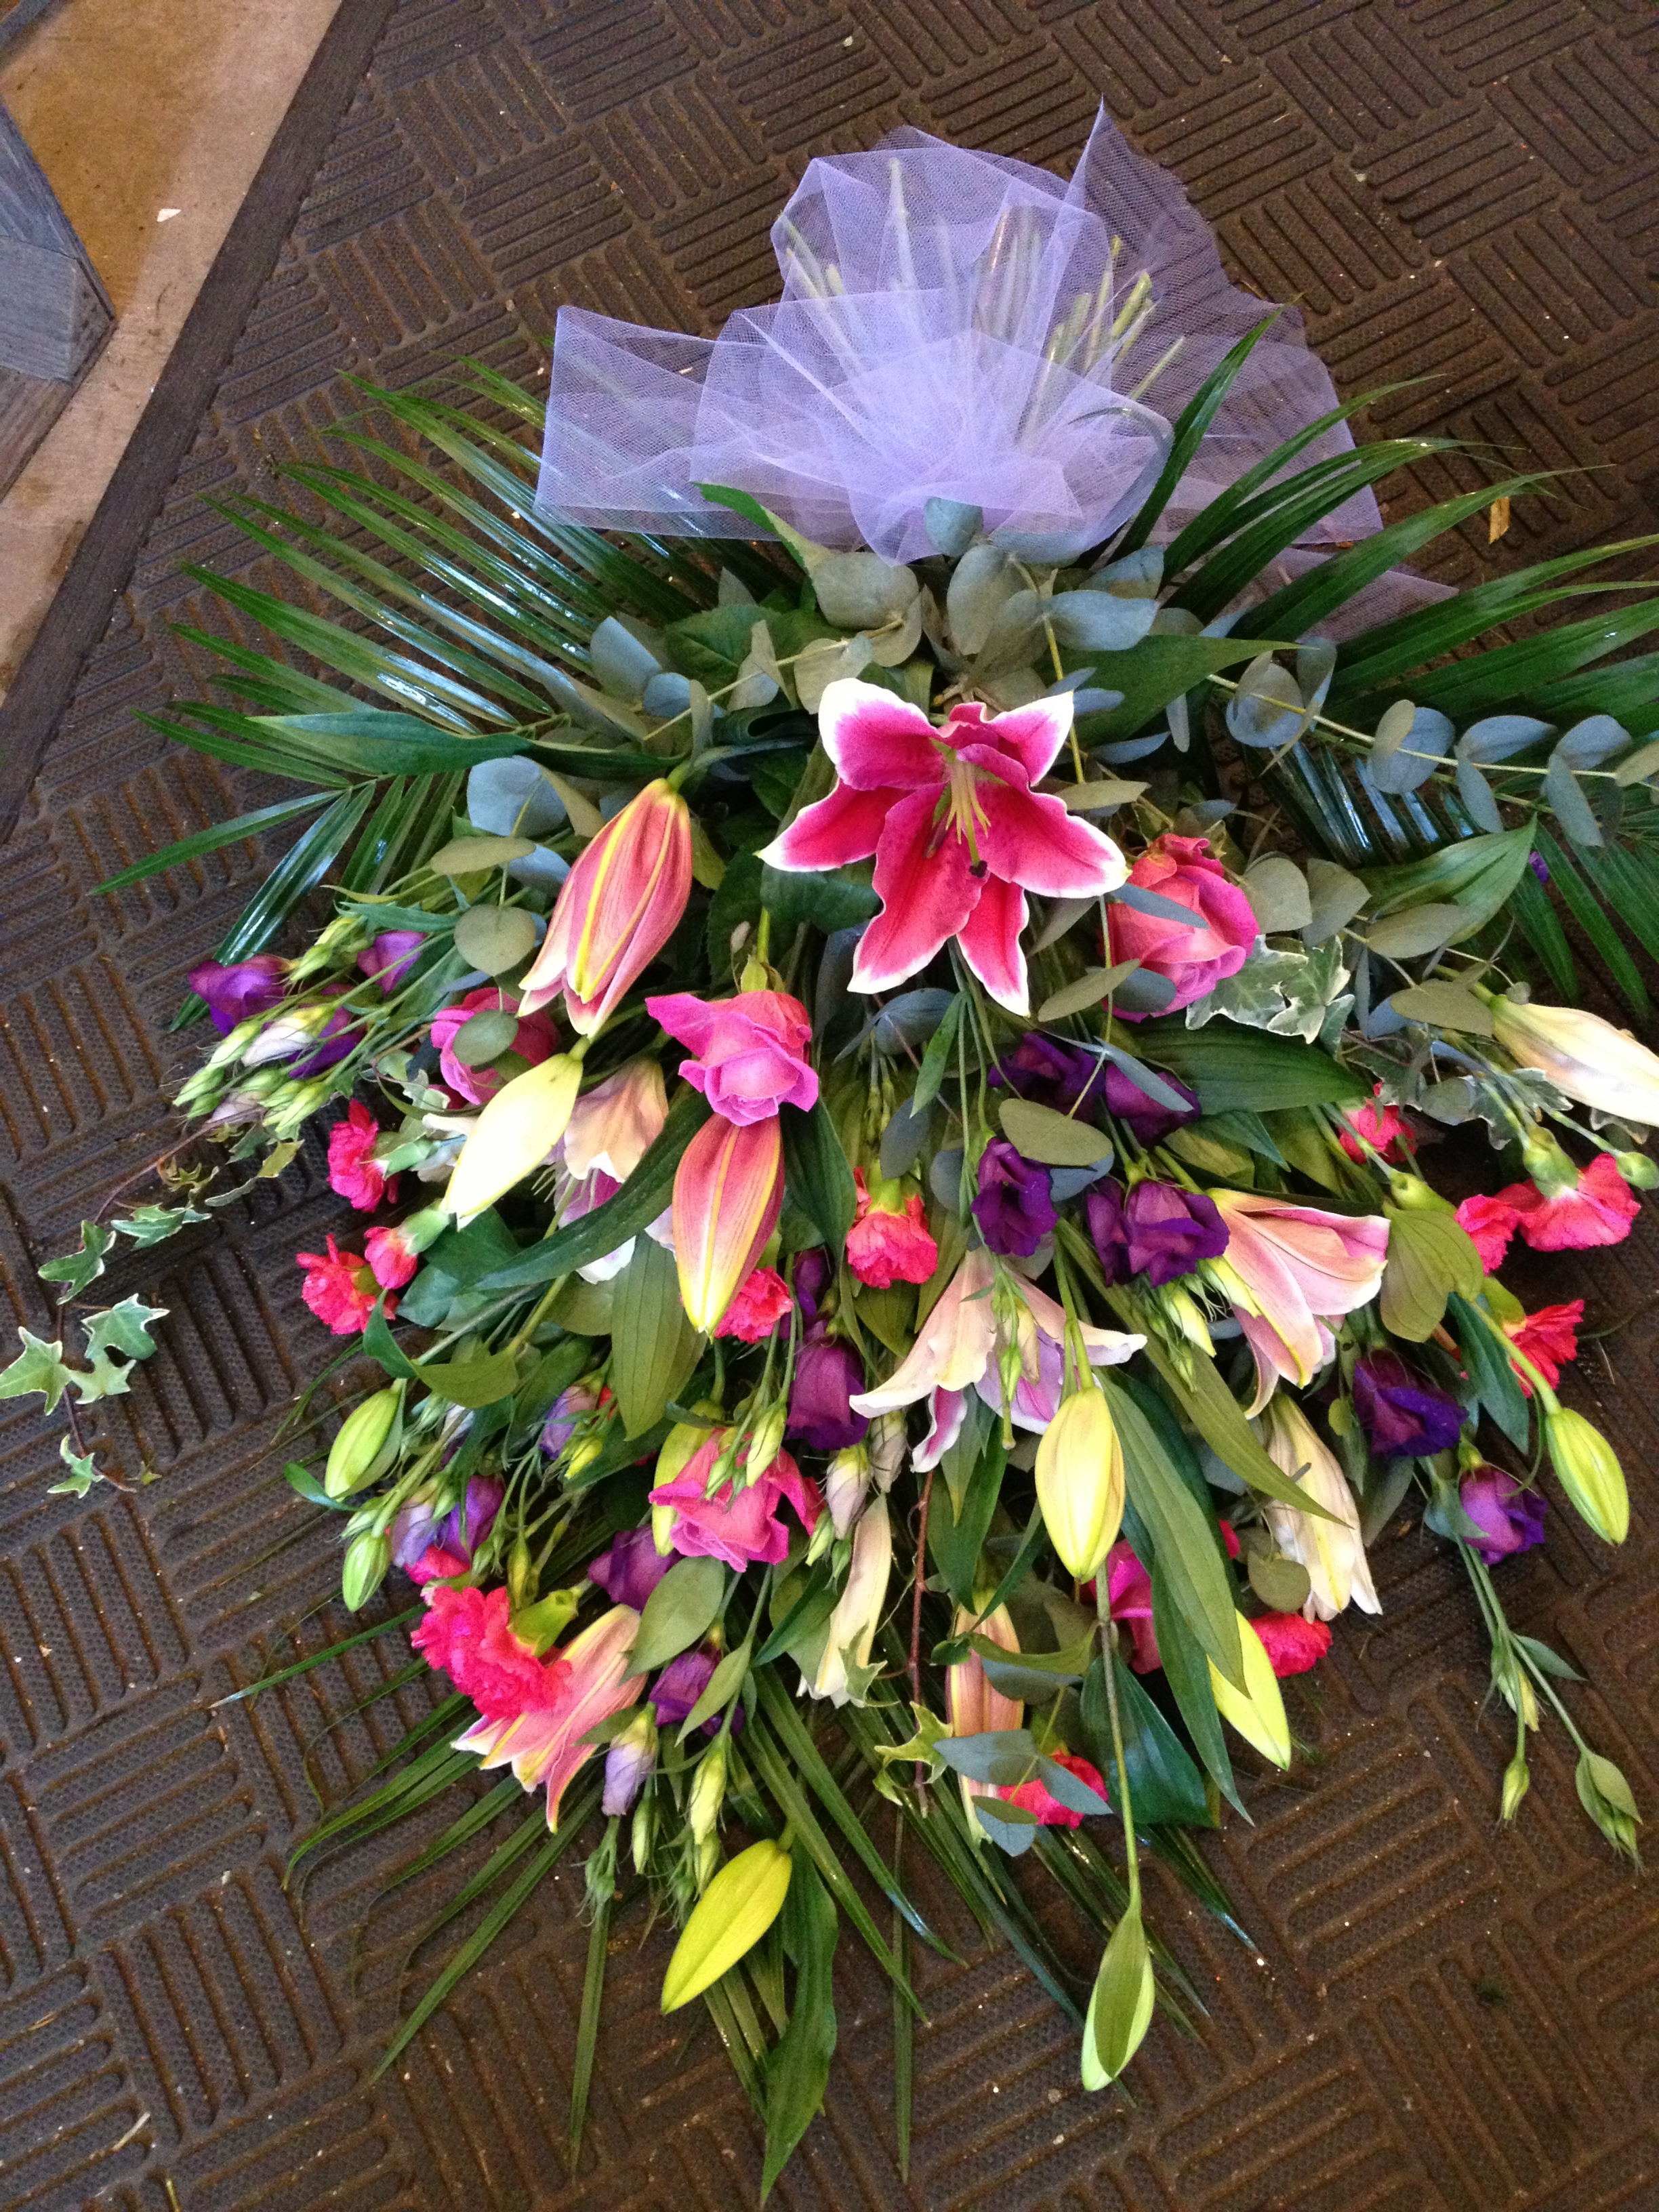 Jason's funeral flowers, Braunstone, Leicester